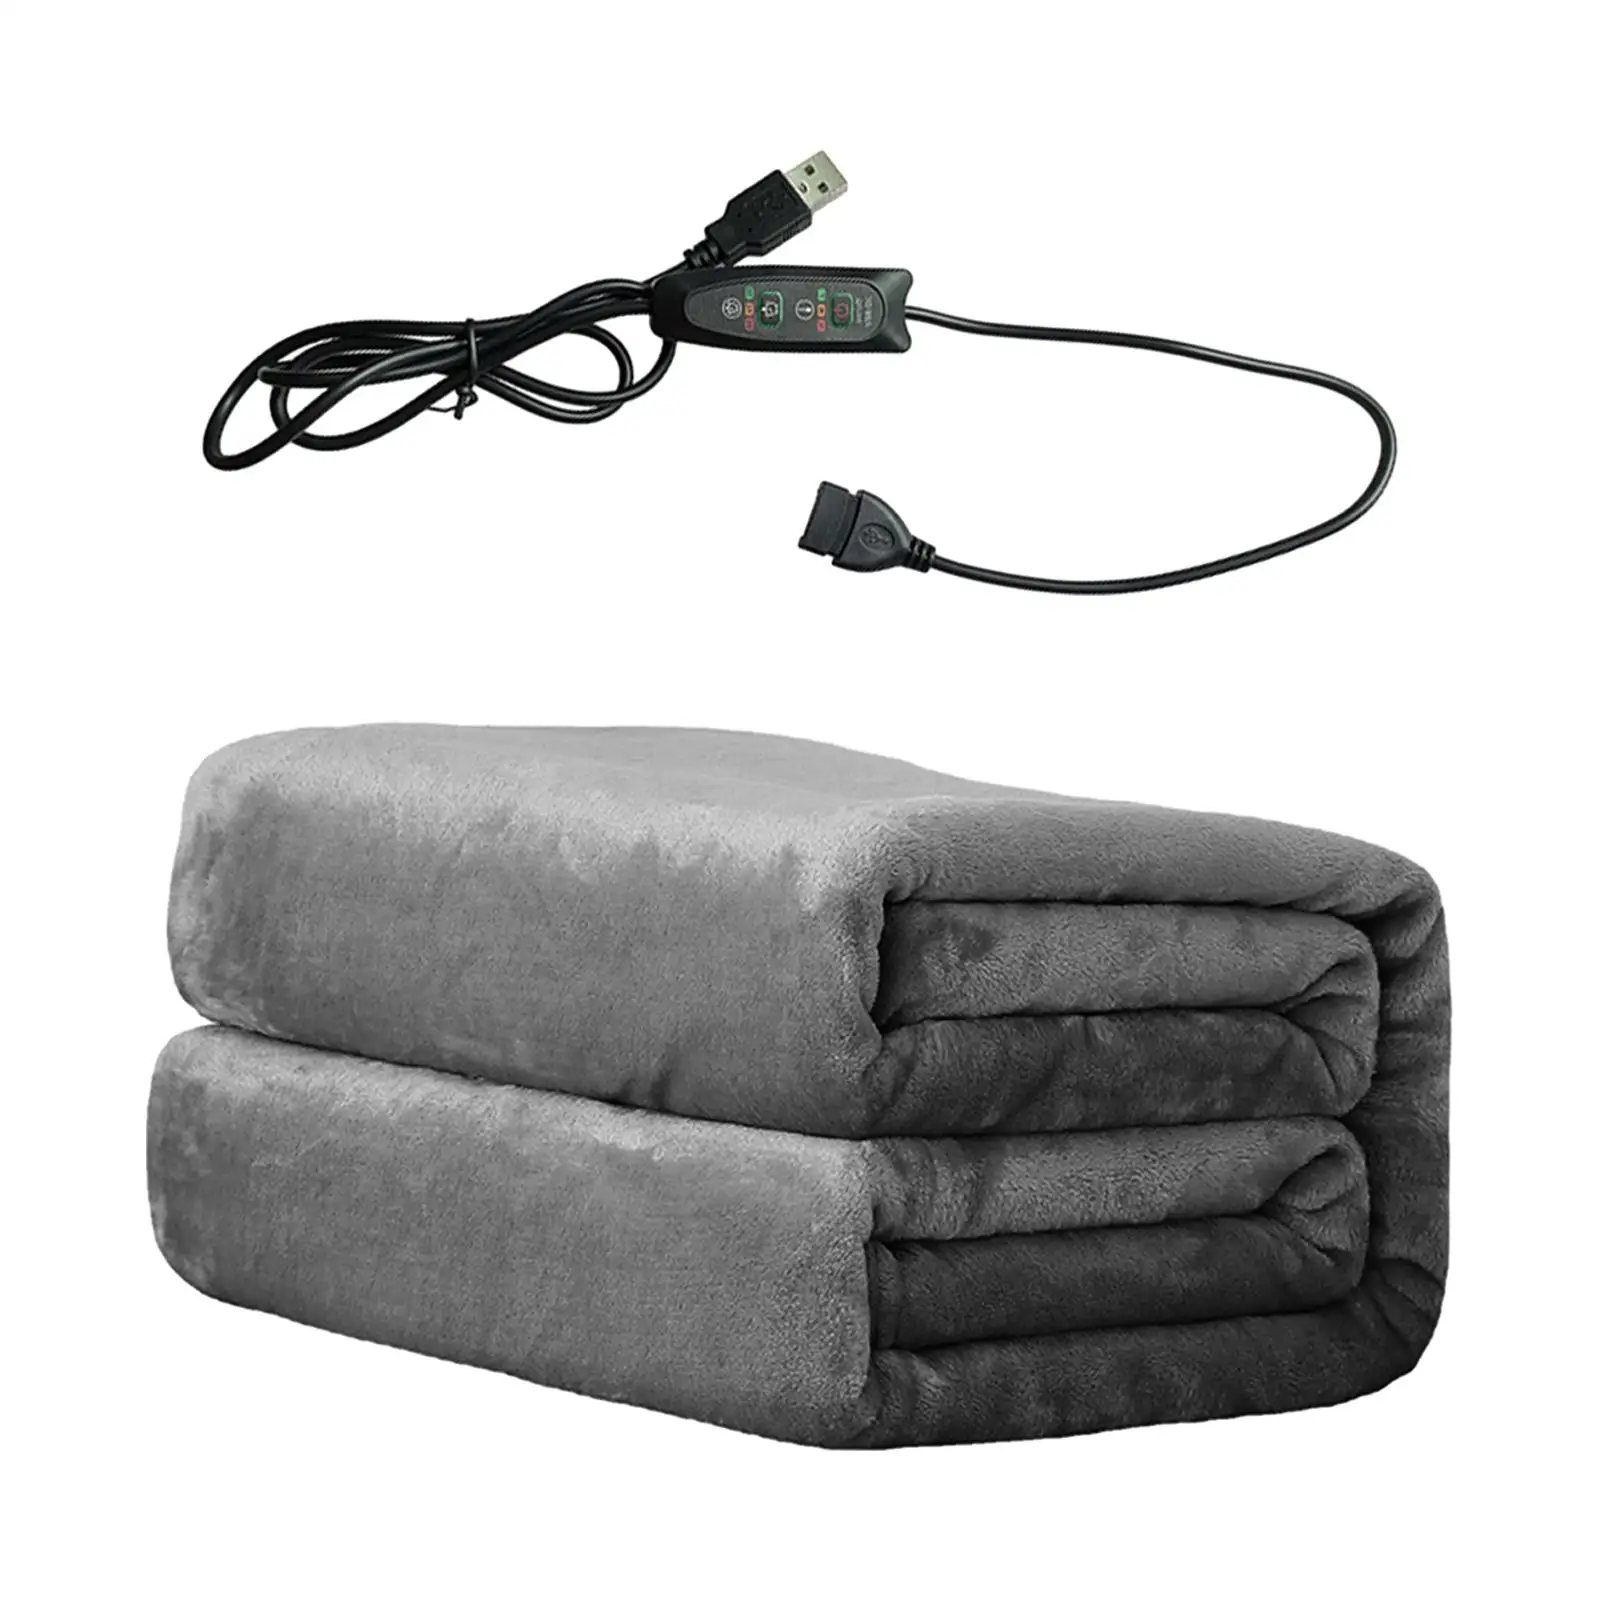 Electric Blanket USB 3 Temperature Control Multifunction Winter Warm Shawl Fast Heating for Hiking Home Traveling Couch Camping